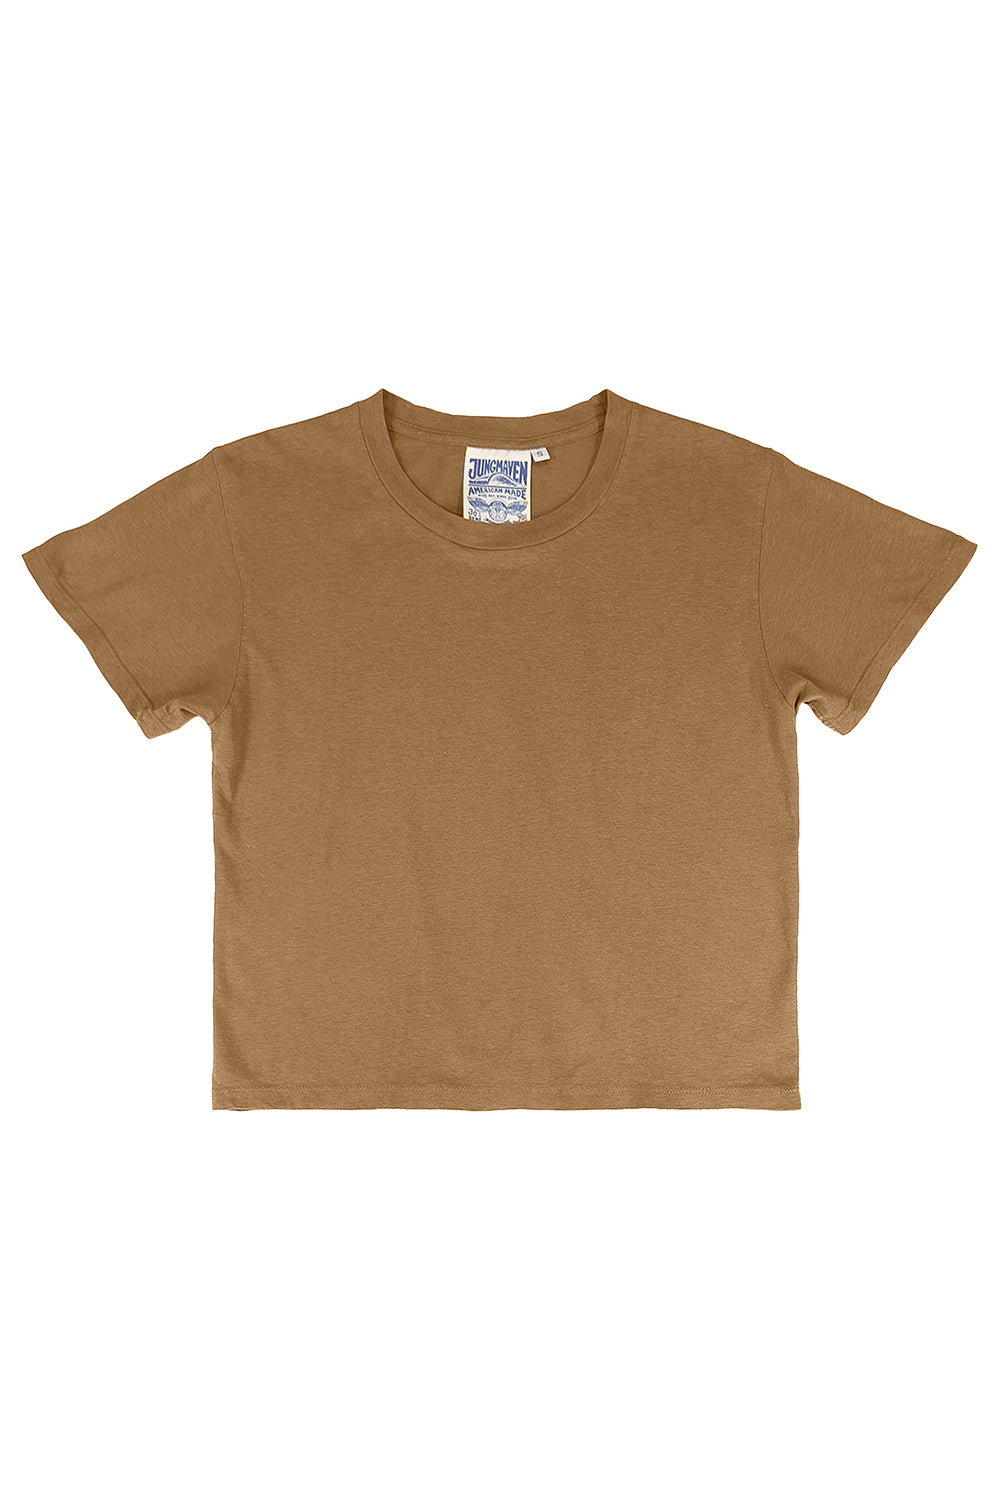 Cropped Ojai Tee | Jungmaven Hemp Clothing & Accessories / Color: Coyote